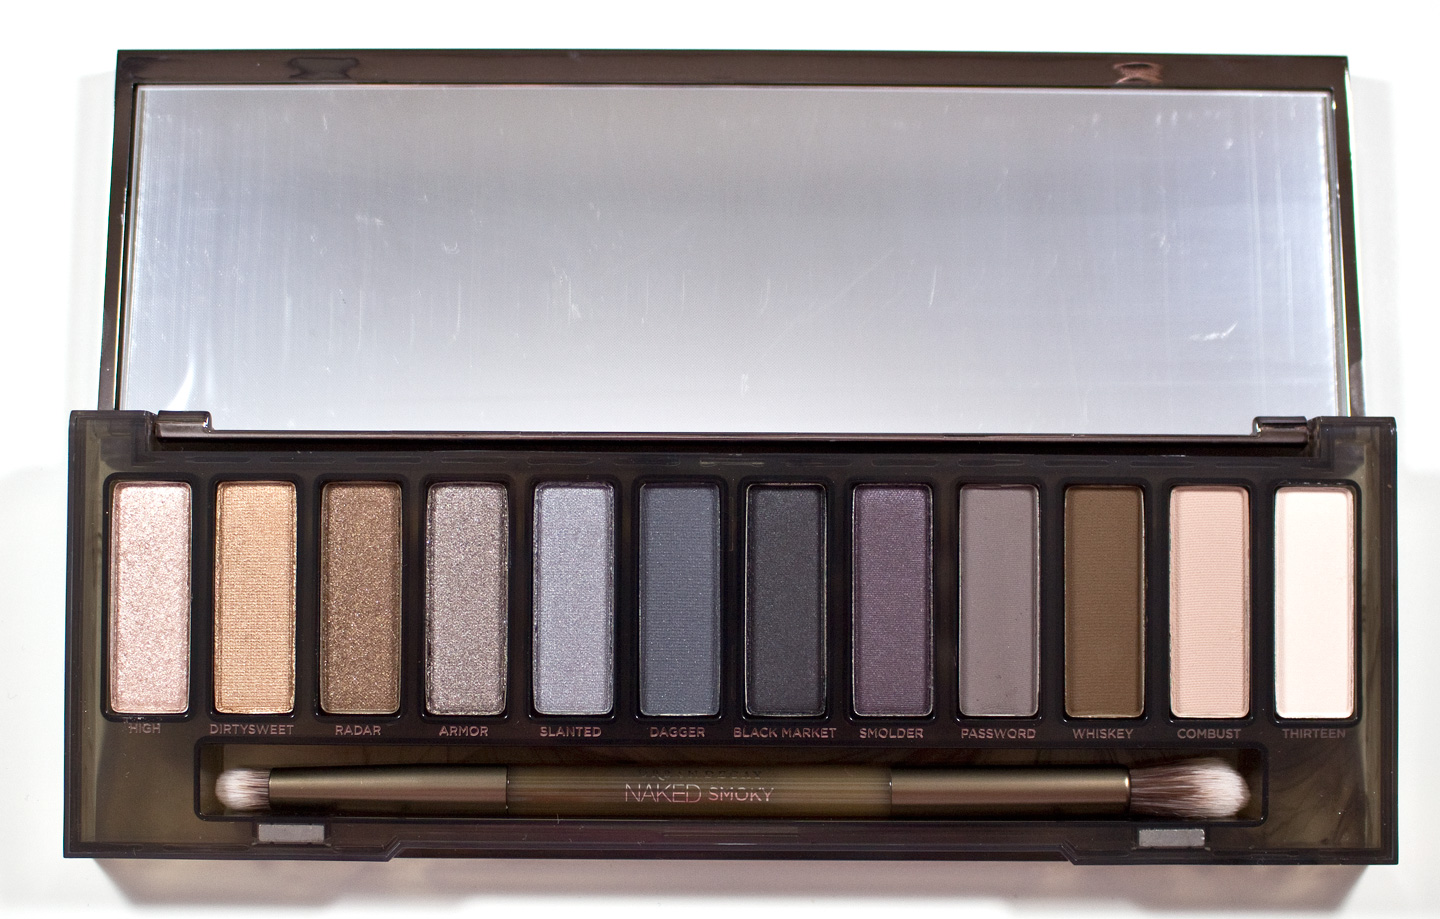 WARPAINT and Unicorns: Urban Decay Naked Heat Palette 